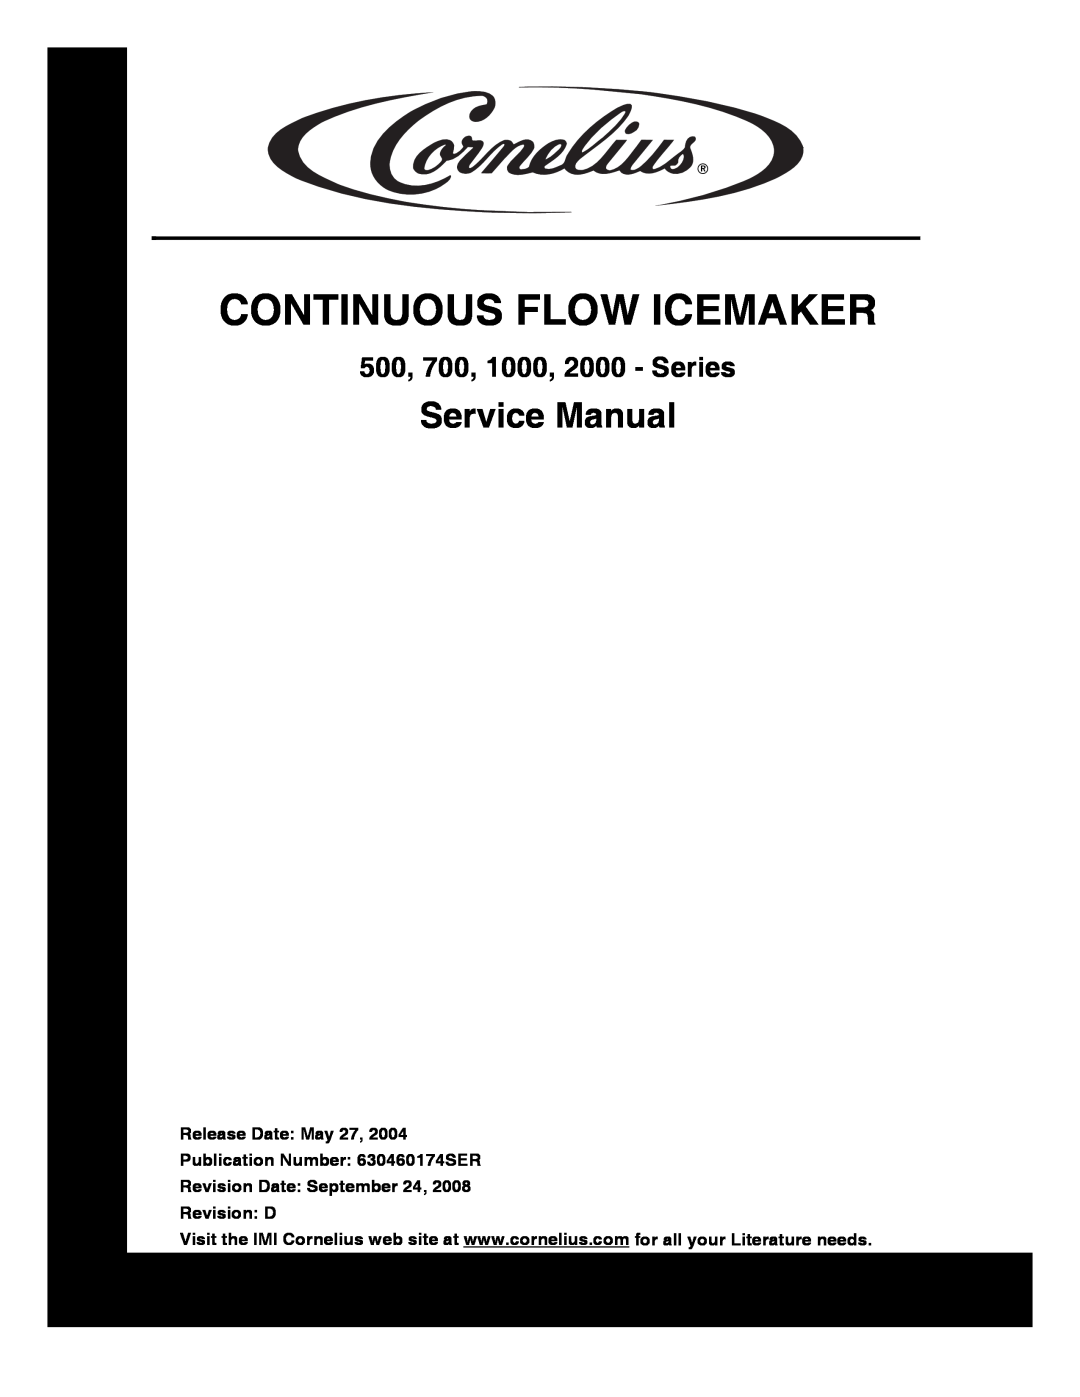 Cornelius service manual Continuous Flow Icemaker, 500, 700, 1000, 2000 - Series, Release Date May 